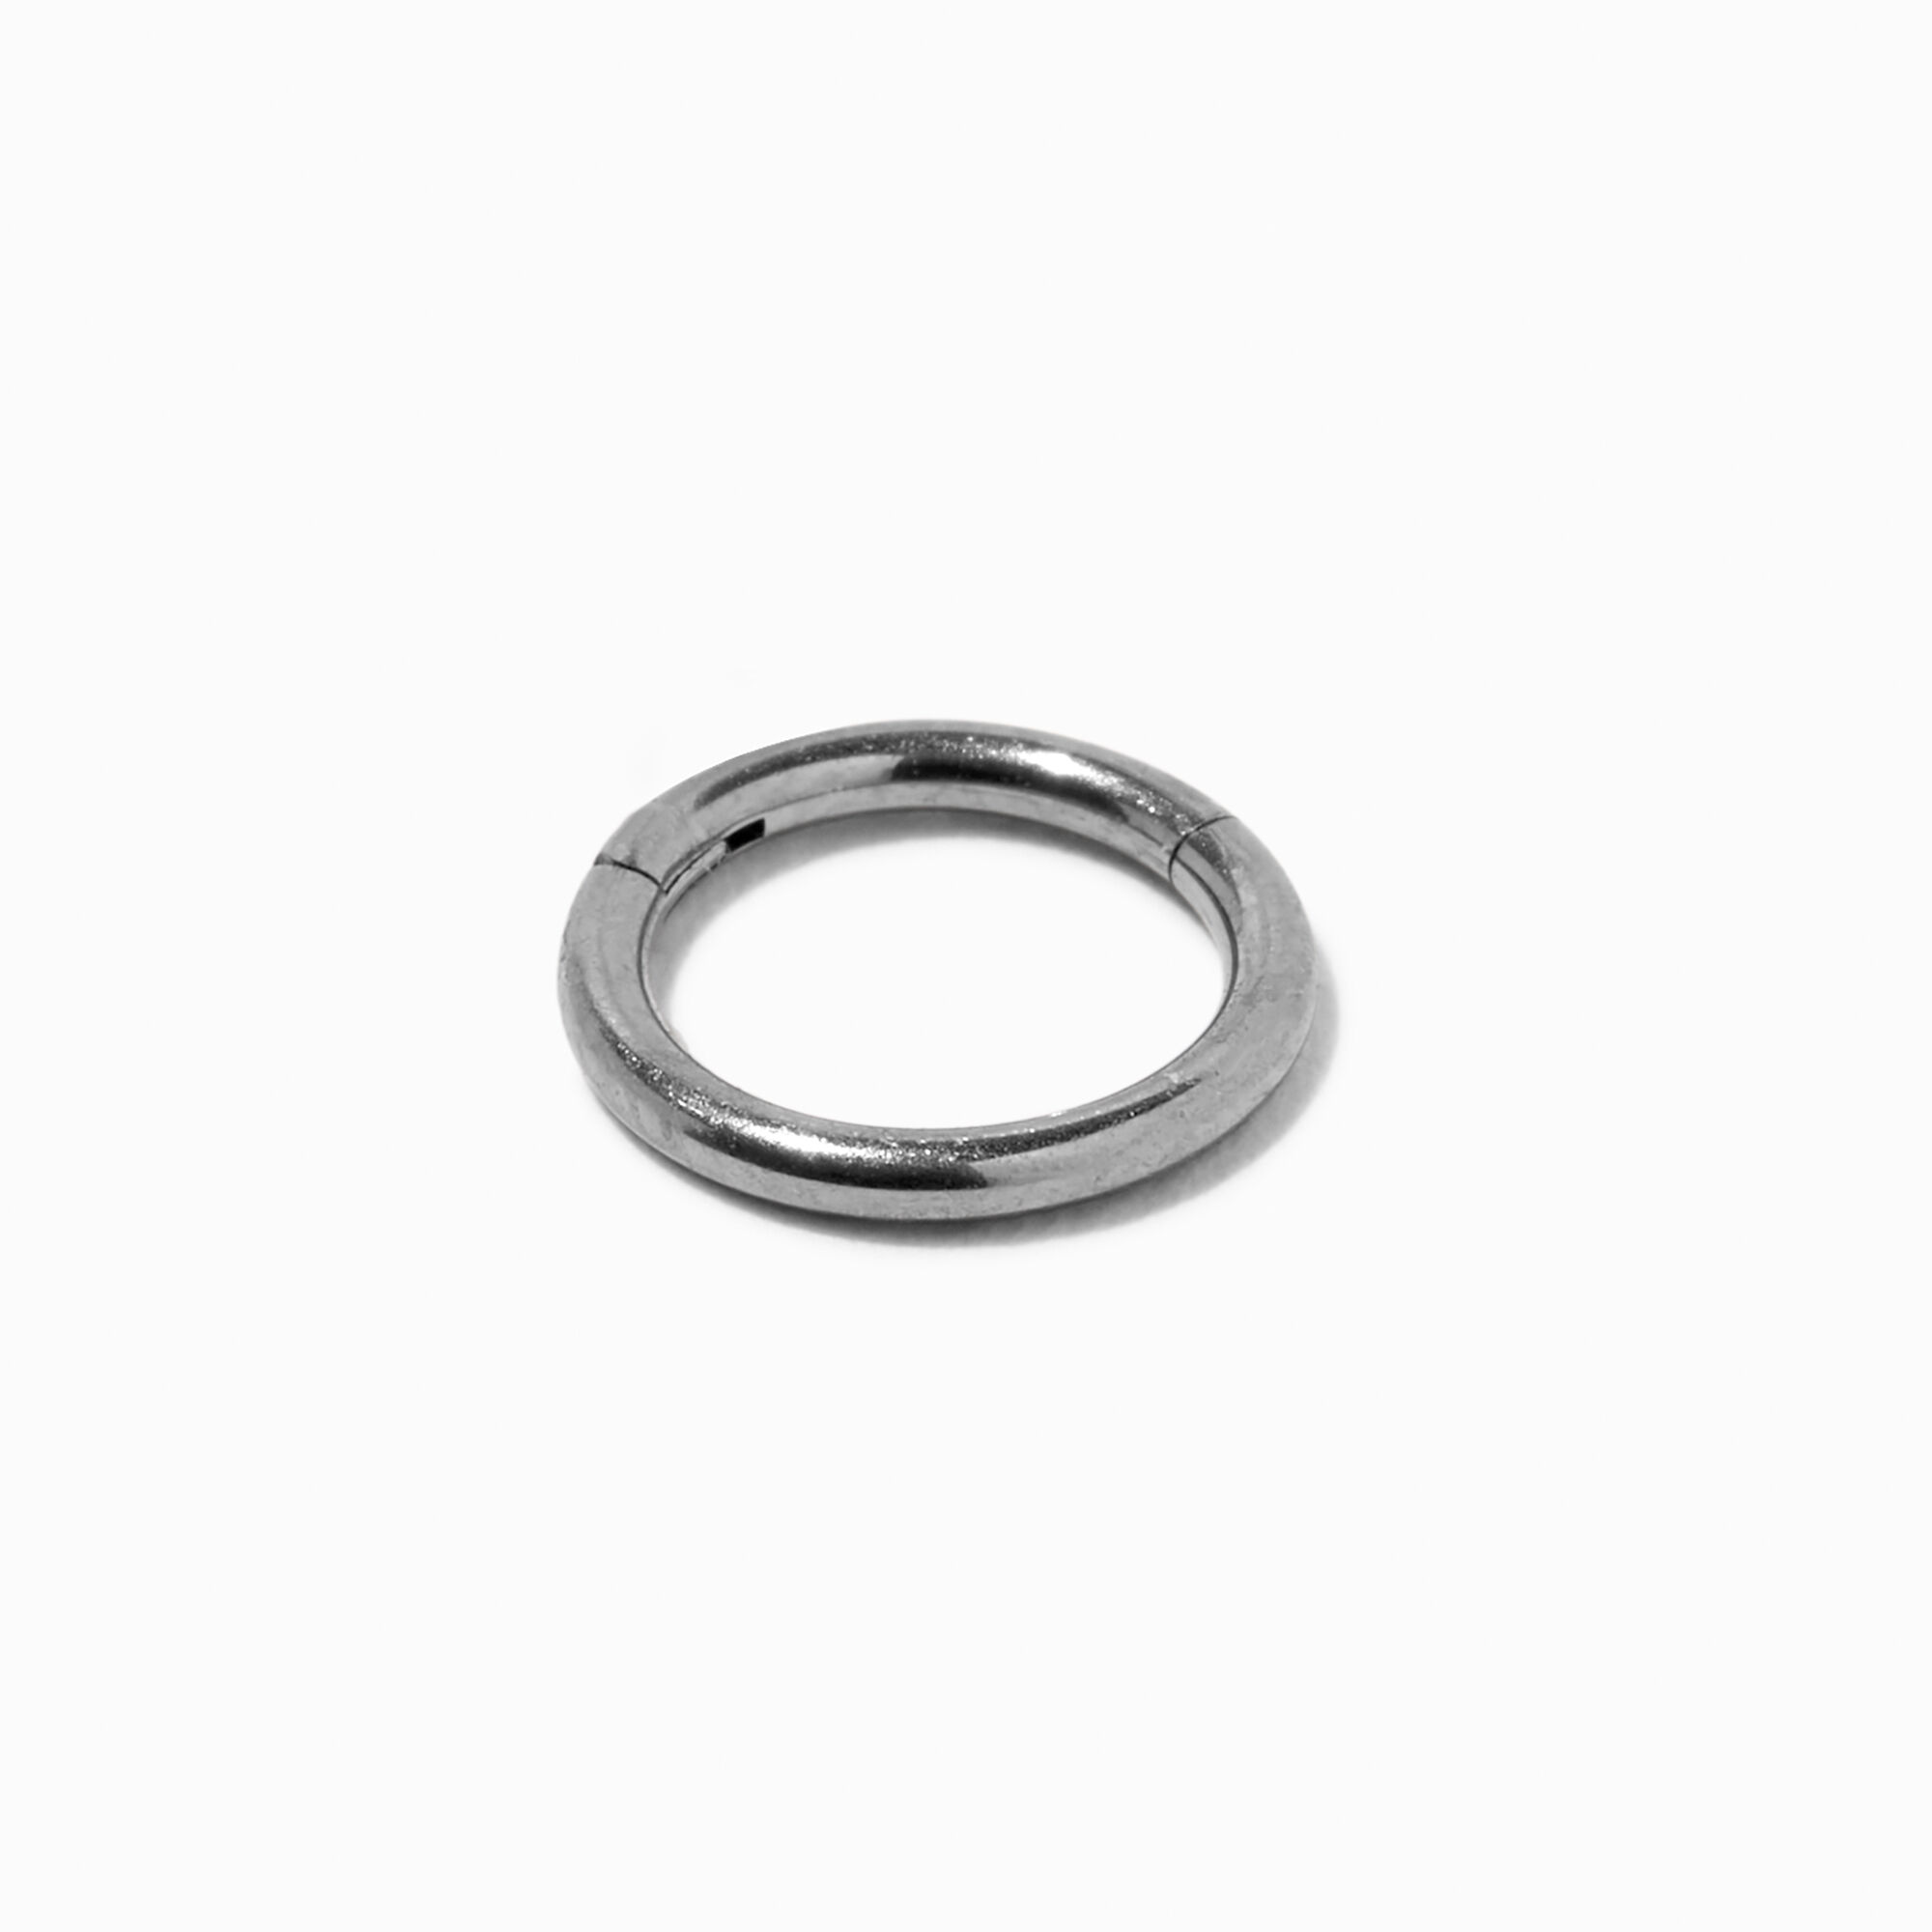 View Claires Tone Tragus Hoop Earring Silver information